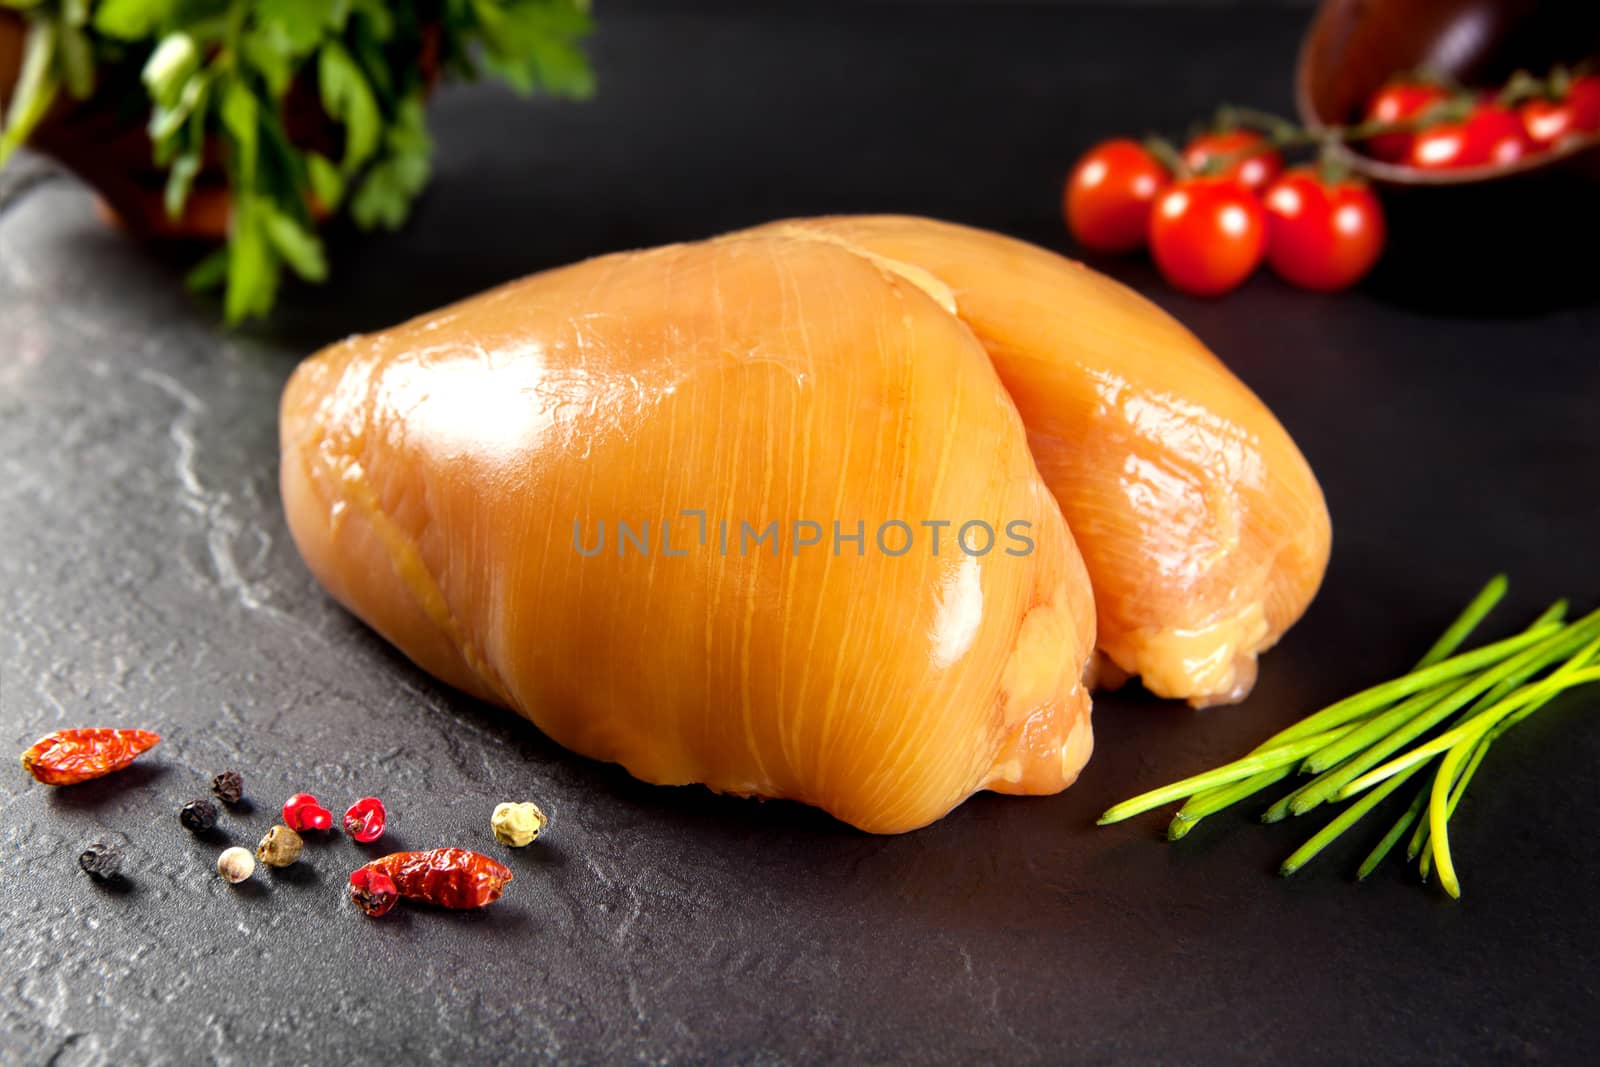 Raw and fresh meat. Whole chicken breast without cooking. Chicken birds fed yellow corn